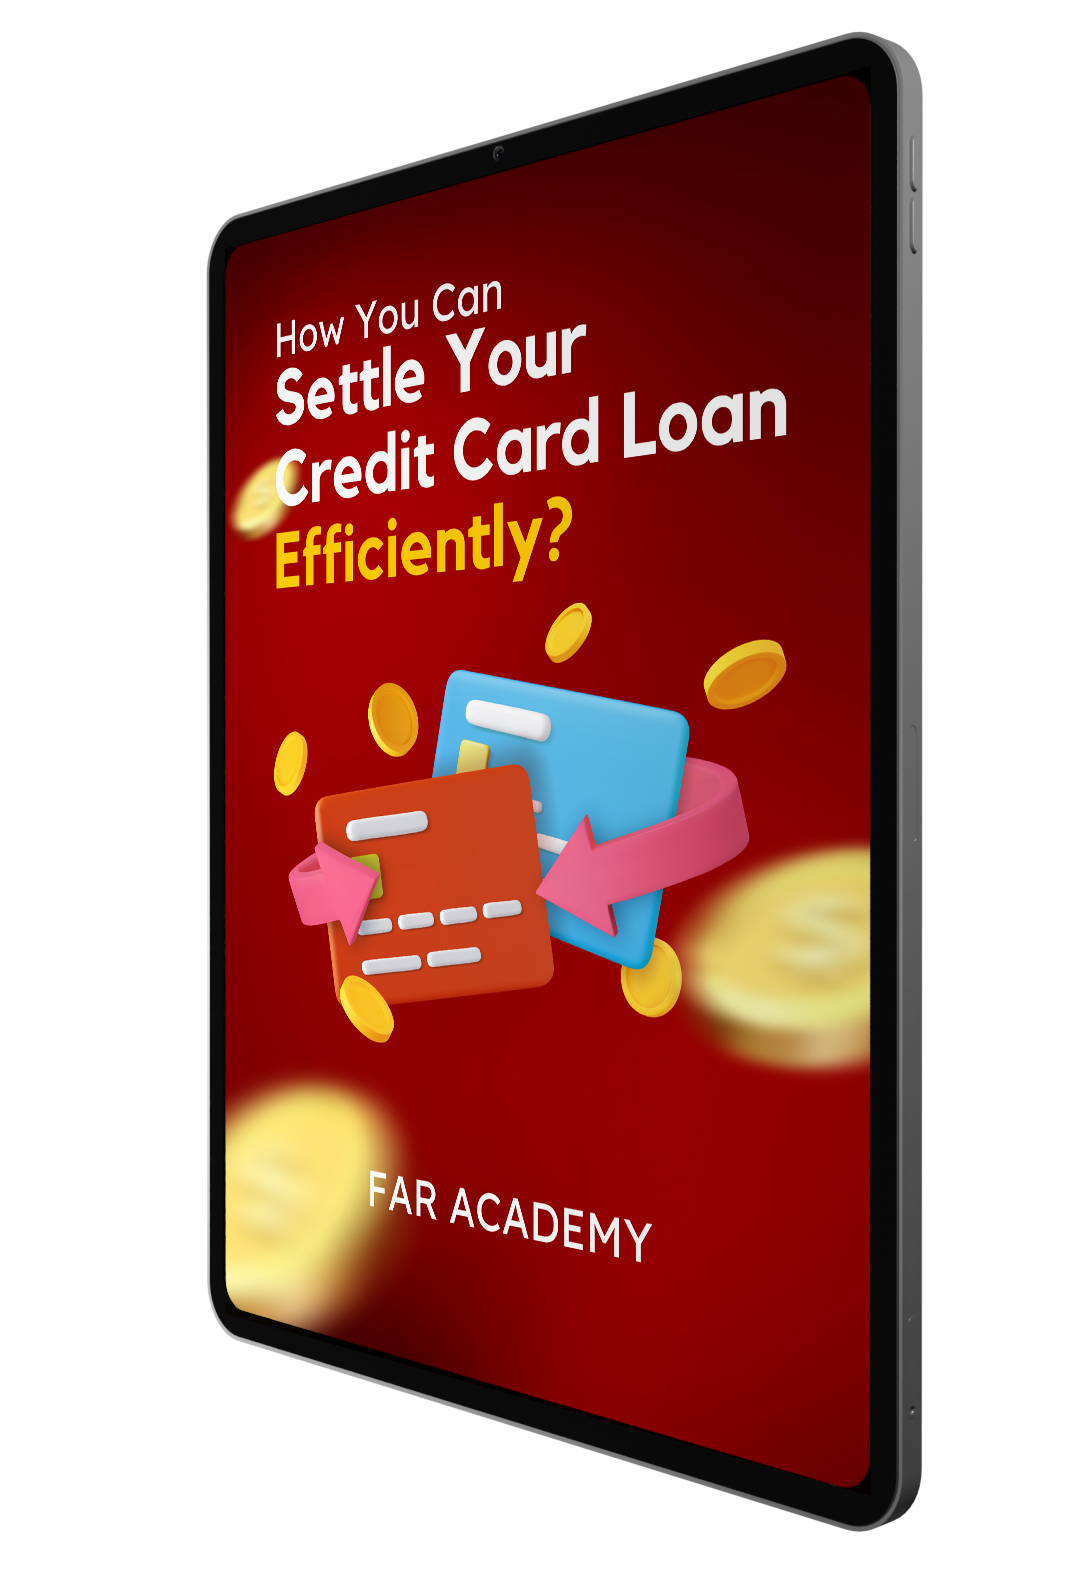 How You Can Settle Your Credit Card Loan Effectively